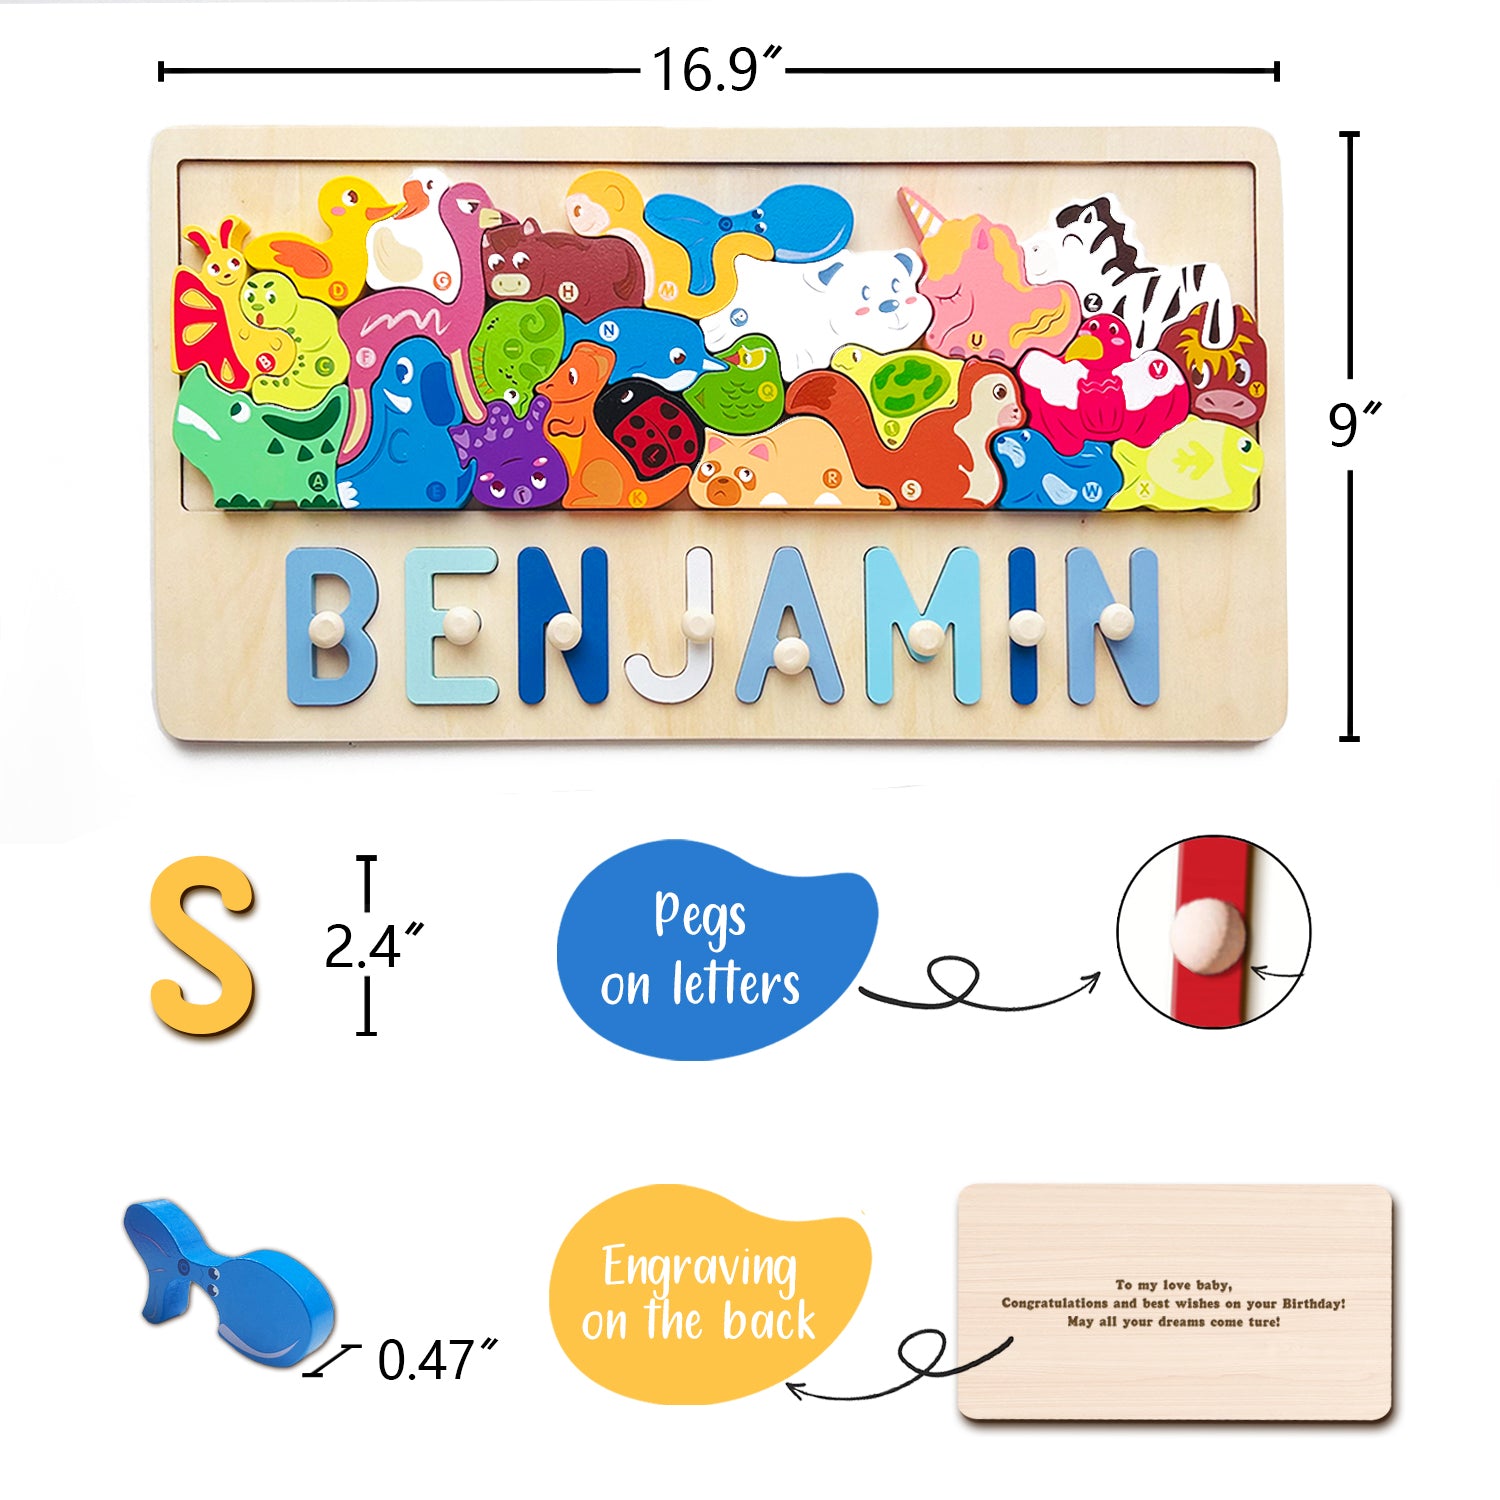 Personalized Wooden Animal Stacking Name Puzzle Introducing Woodemon's latest innovation in early childhood development, the Personalized Wooden Animal Stacking Name Puzzle! Unleash your child's imagination with this multifaceted learning tool that combin